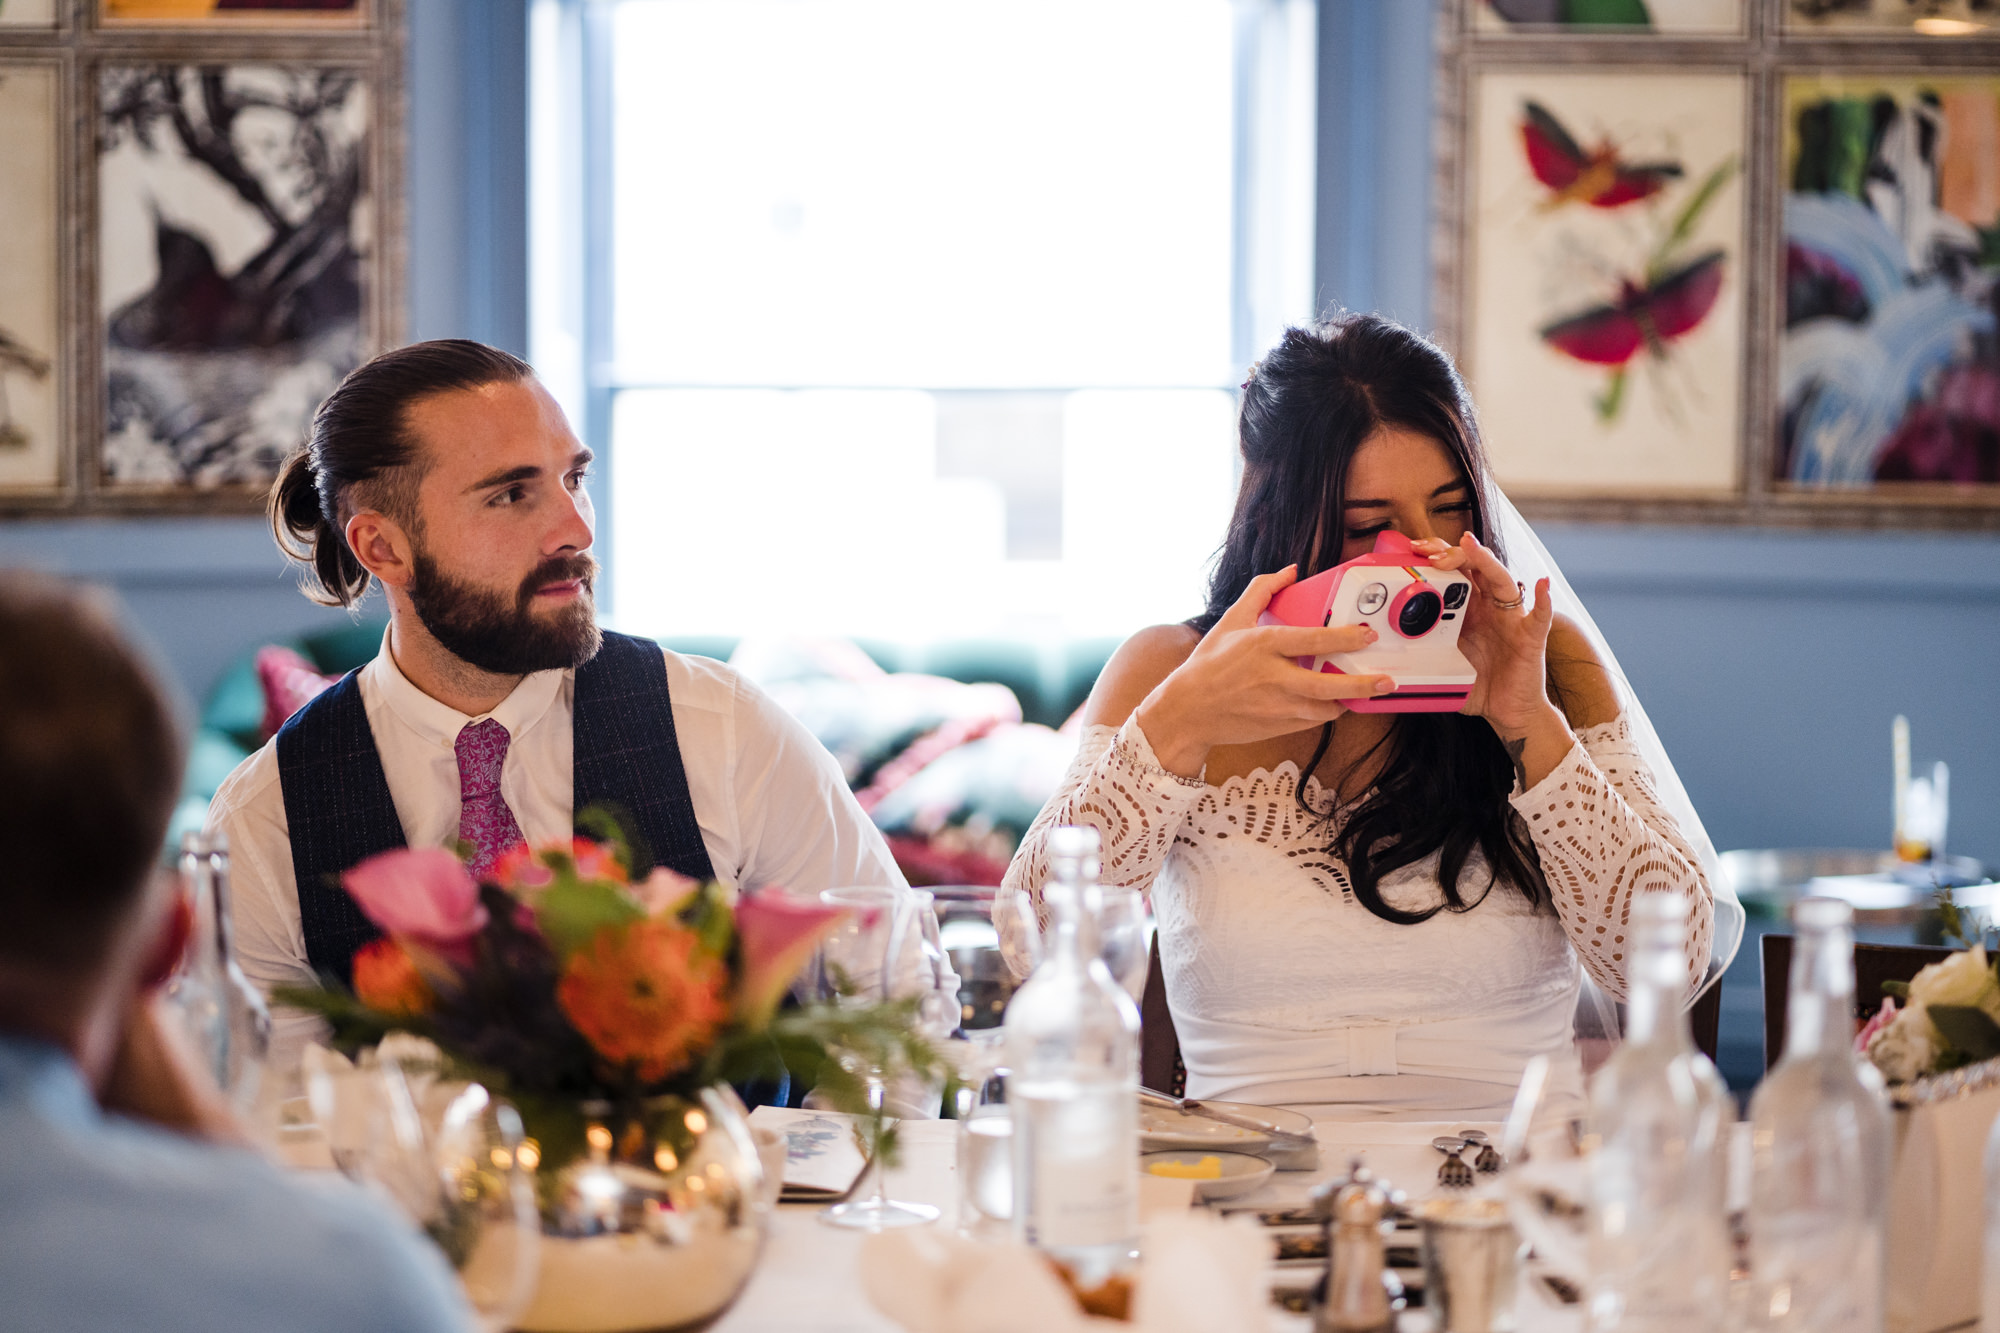 groom and bride sit at the table waiting for wedding breakfast while bride snaps a photo with her Polaroid camera